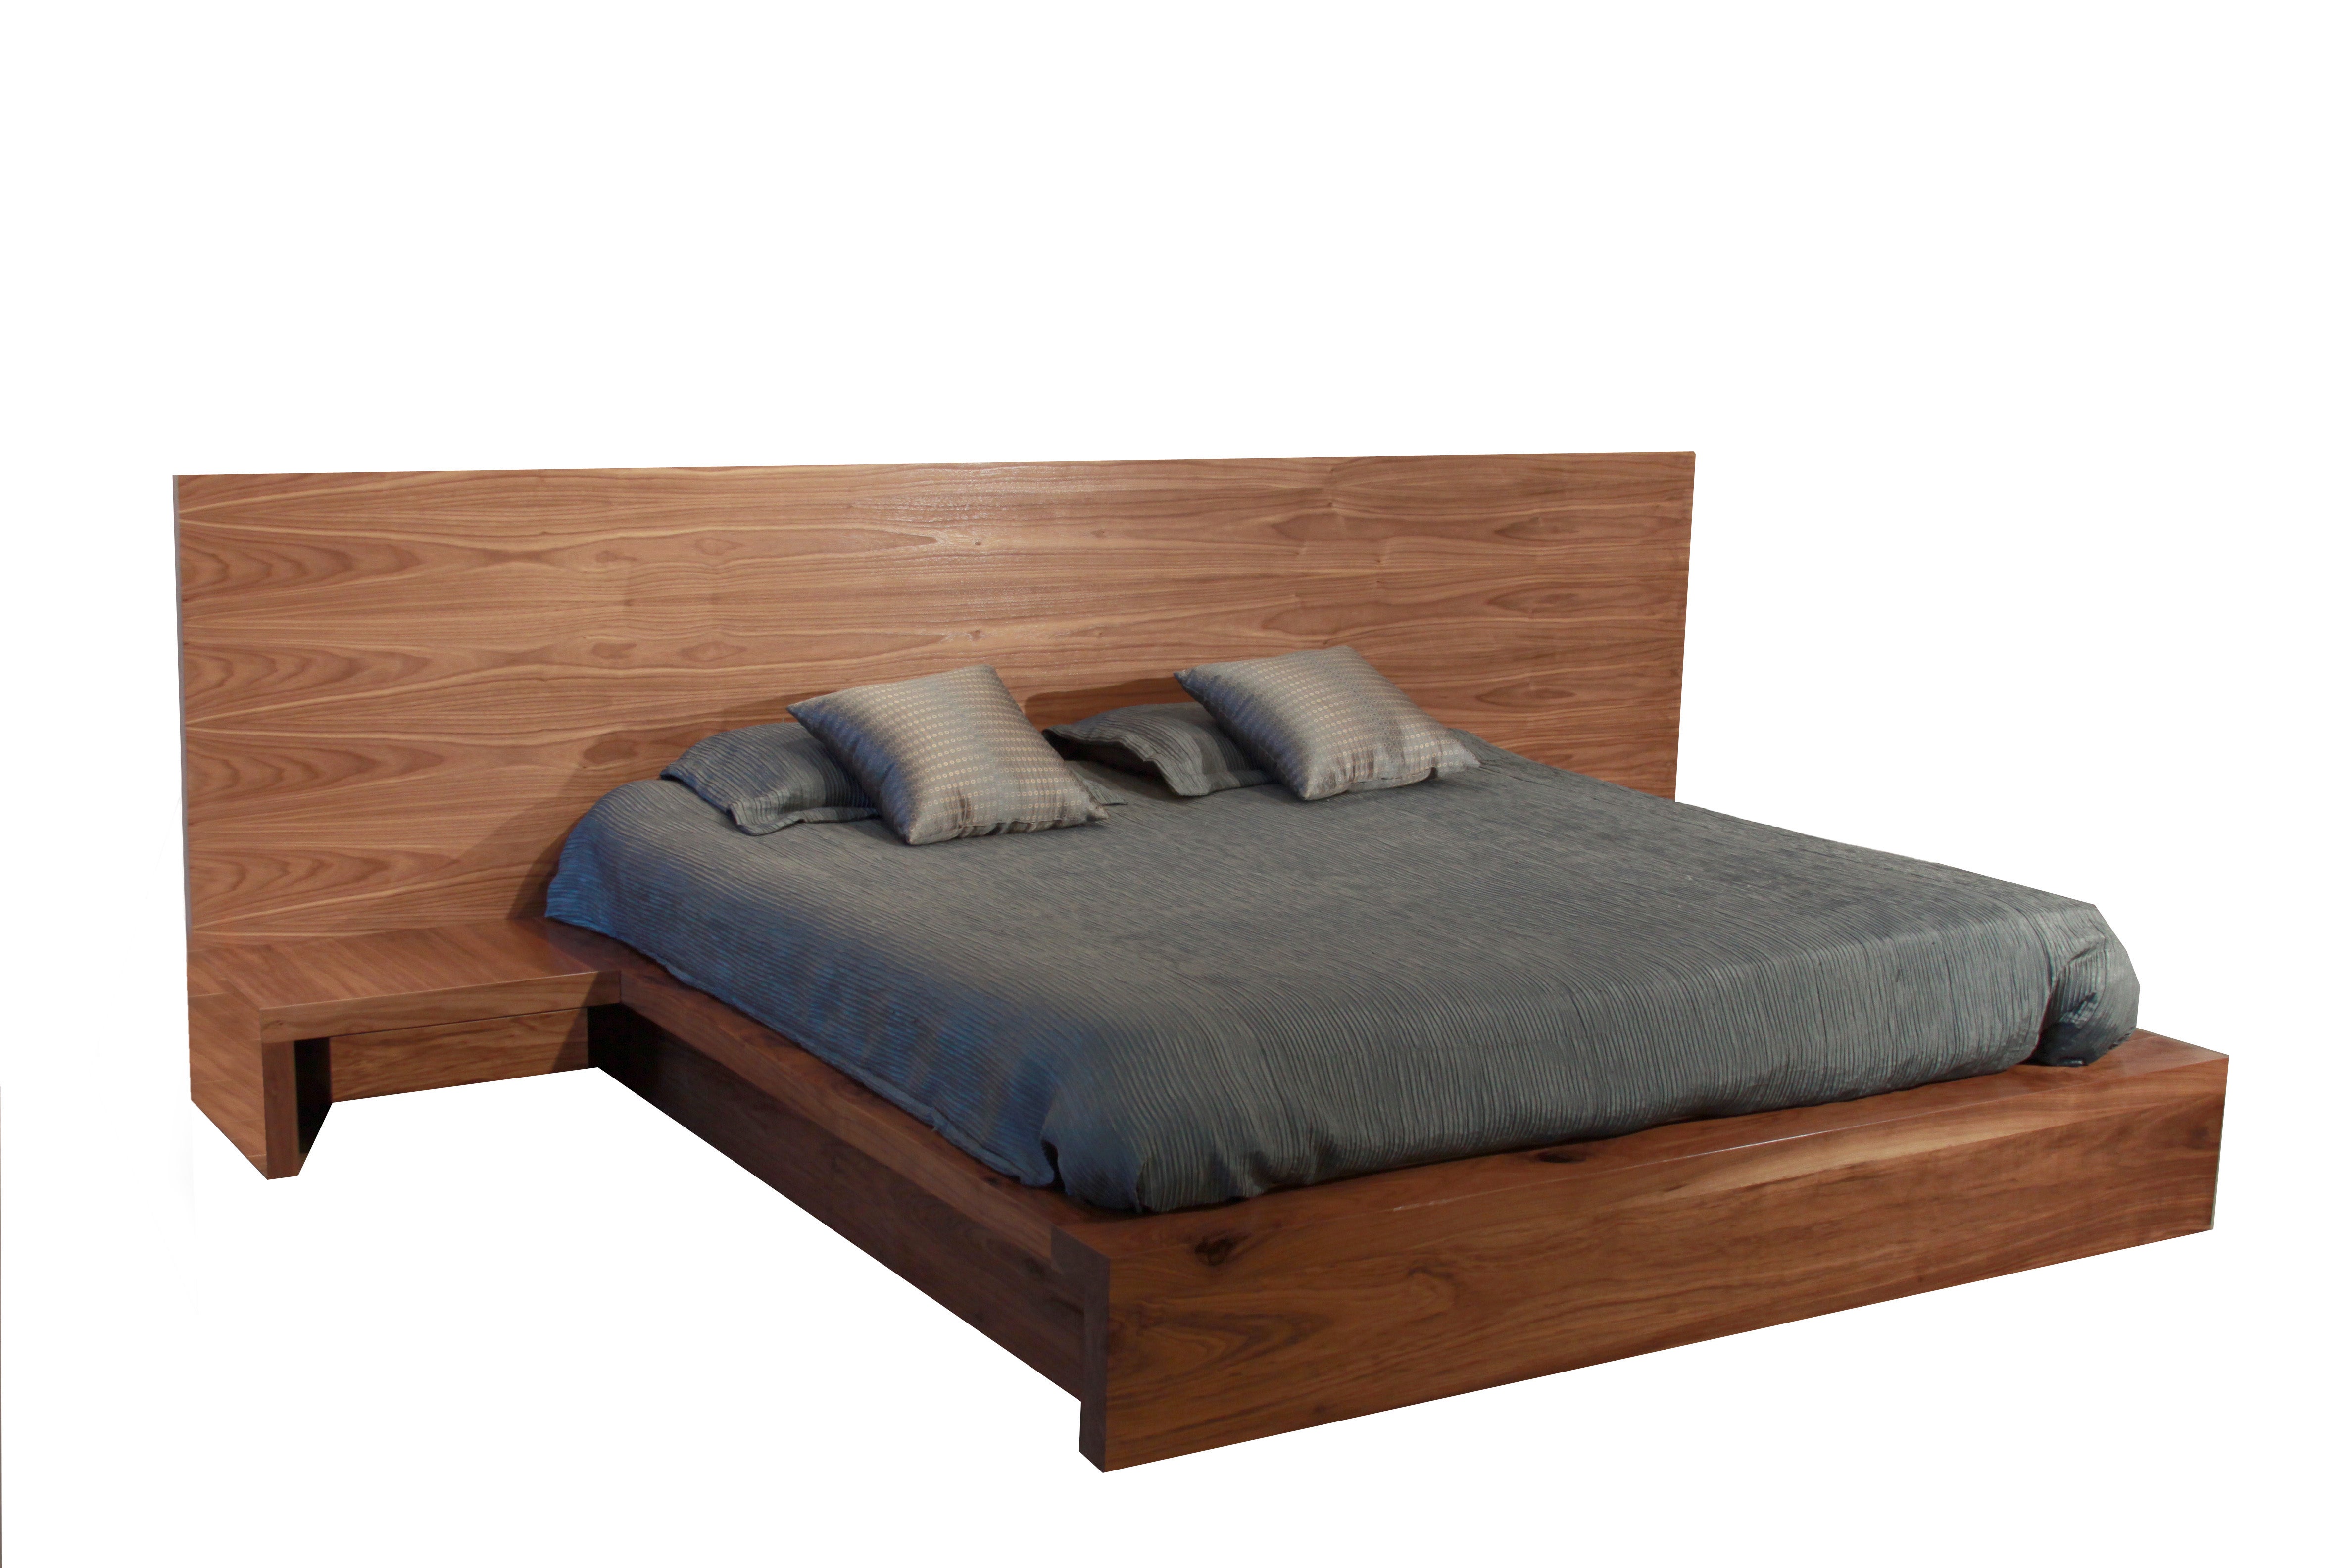 The Aldrich Bed by Thomas Hayes Studio